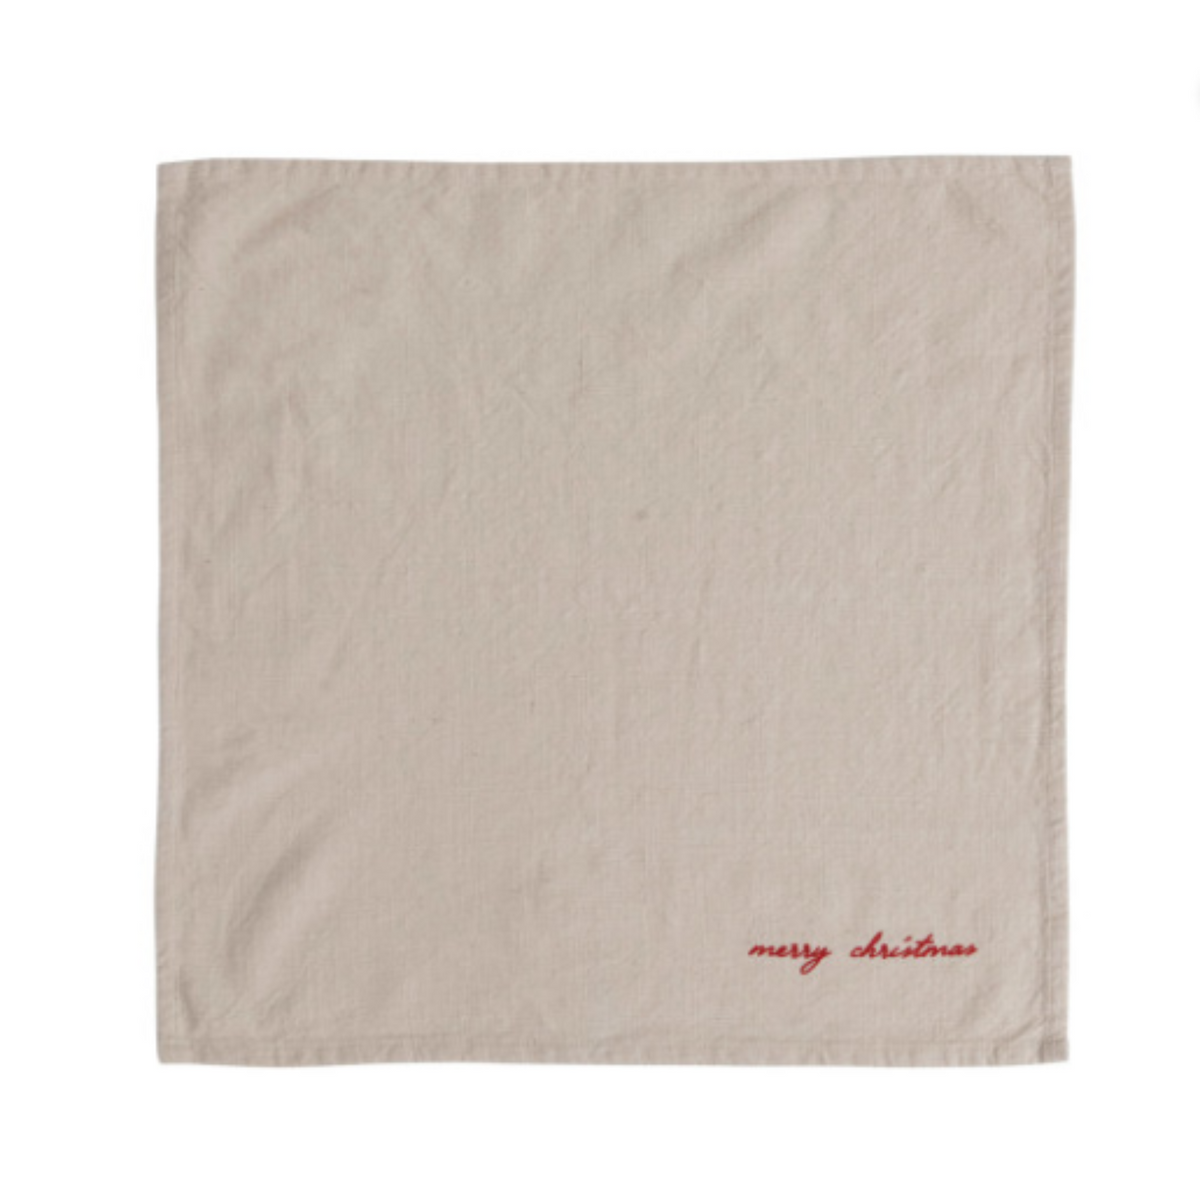 Square Cotton Napkins With Embroidery &quot;Merry Christmas&quot;, Set of 4